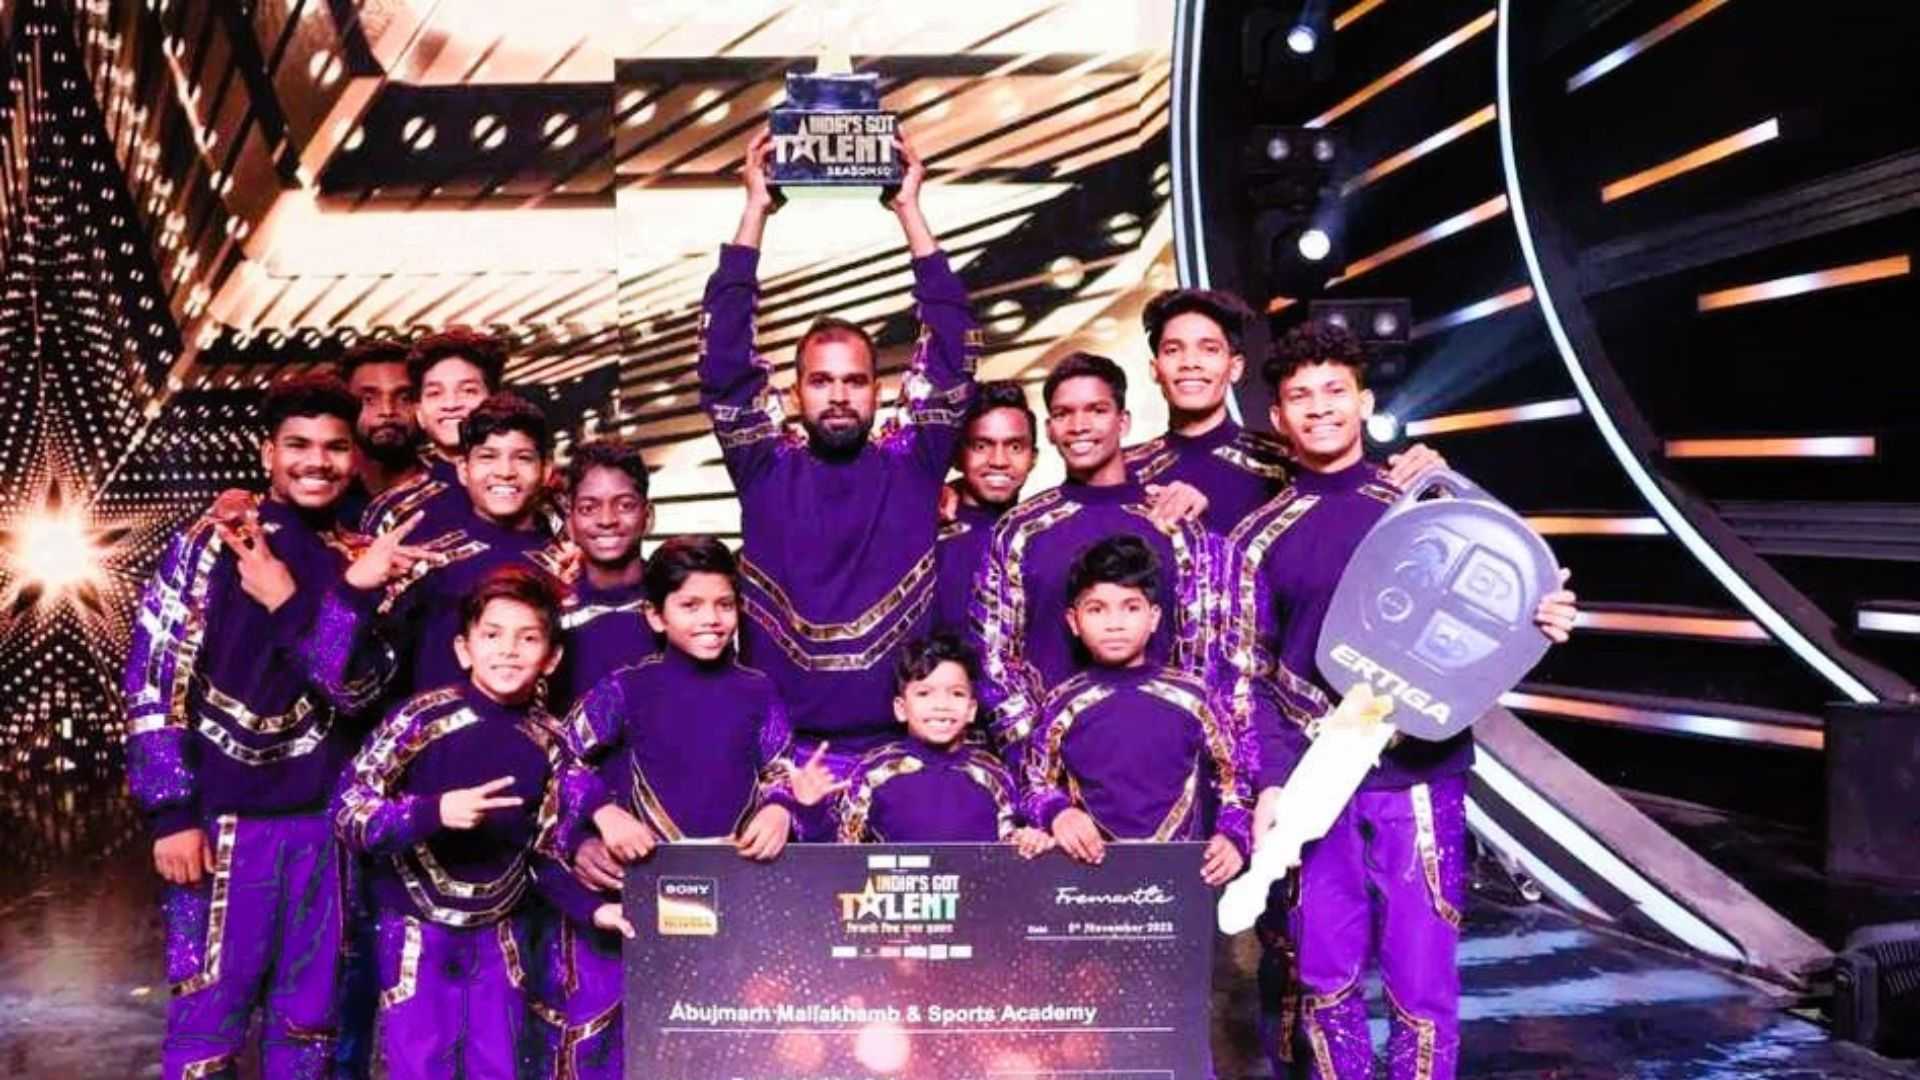 India's Got Talent 10: Ariel group Abujhmad Mallakhamb Academy defeat Raaga Fusion, emerges as the winner